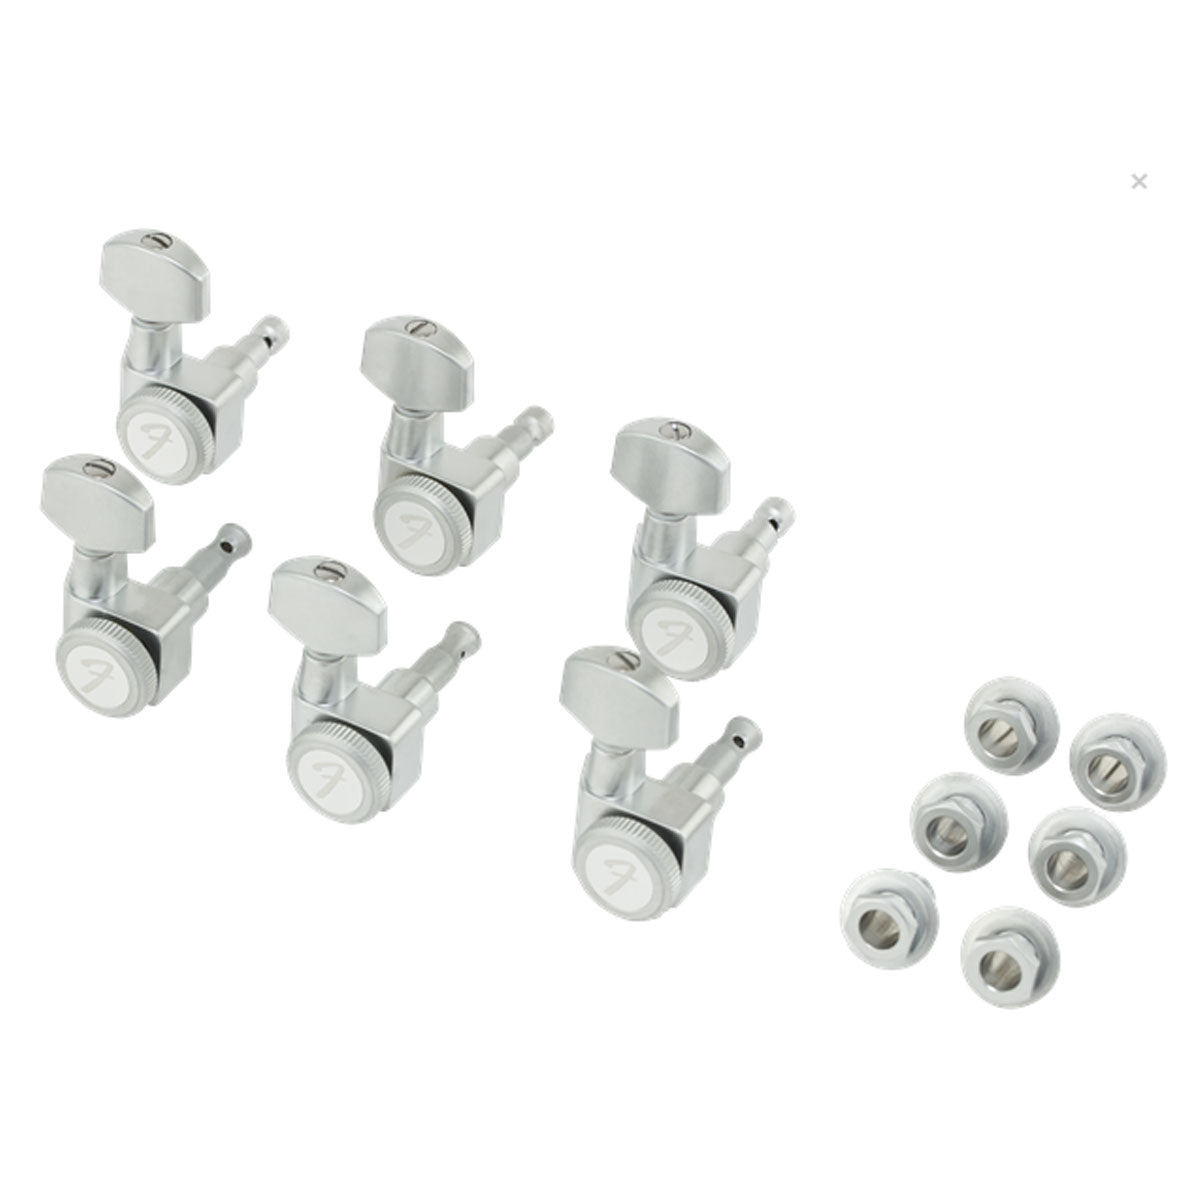 Fender Locking Tuners Brushed Chrome - Stratocaster/Telecaster Tuning Machines (6 Pack) - 0990818000